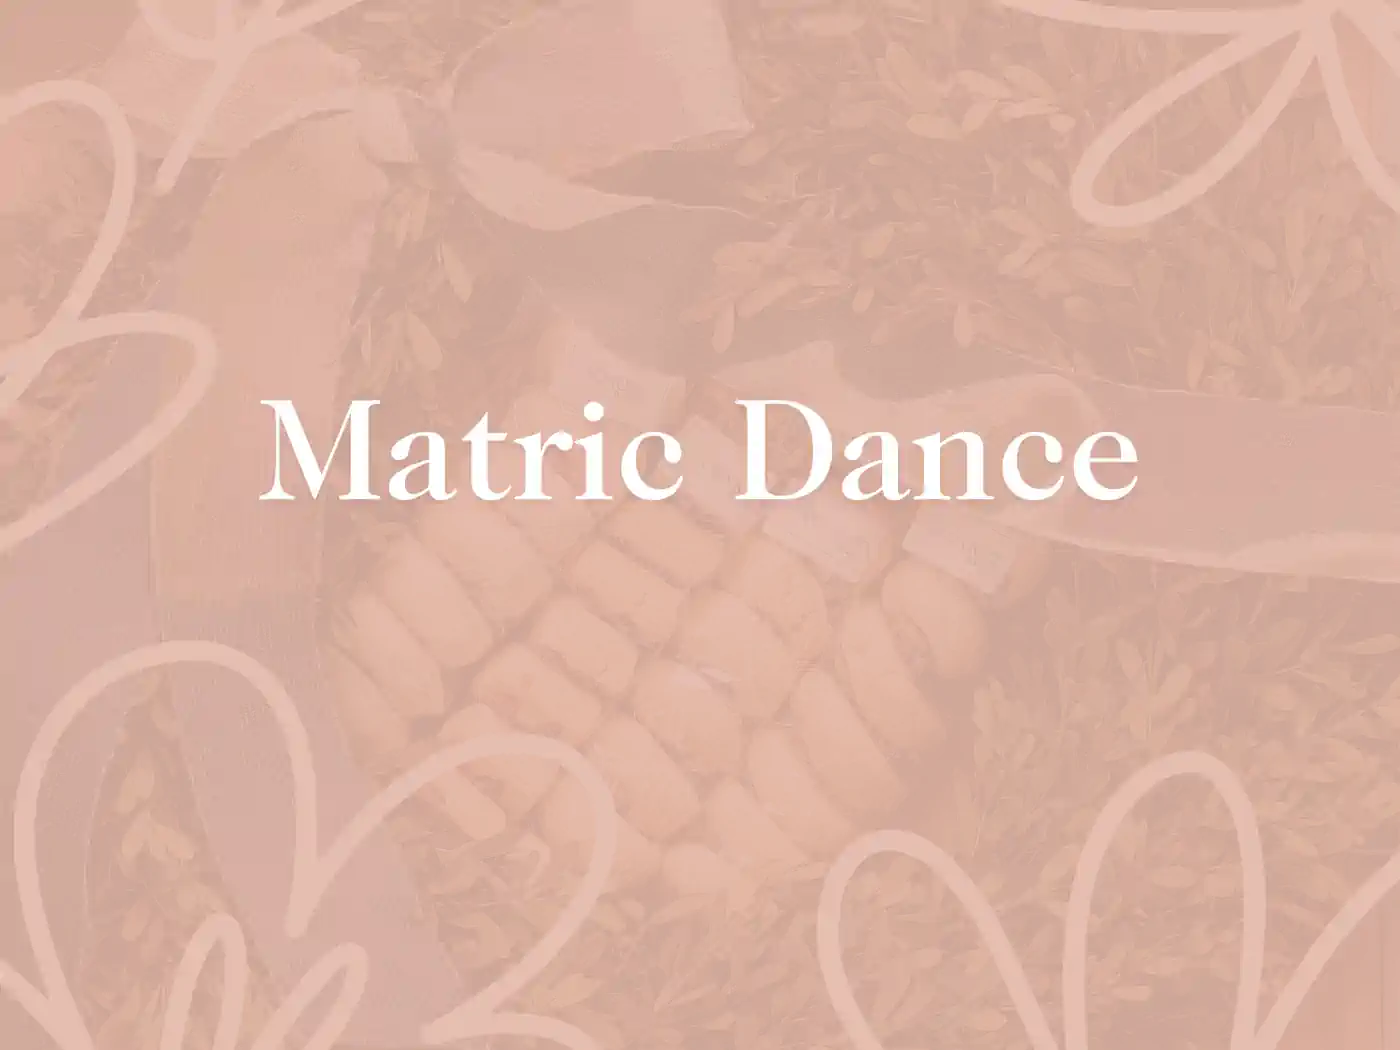 Graphic design featuring the words 'Matric Dance' overlaid on a muted pink background with subtle floral and ribbon details, creating an elegant invitation or announcement theme. Fabulous Flowers and Gifts - Matric Dance. Delivered with Heart.